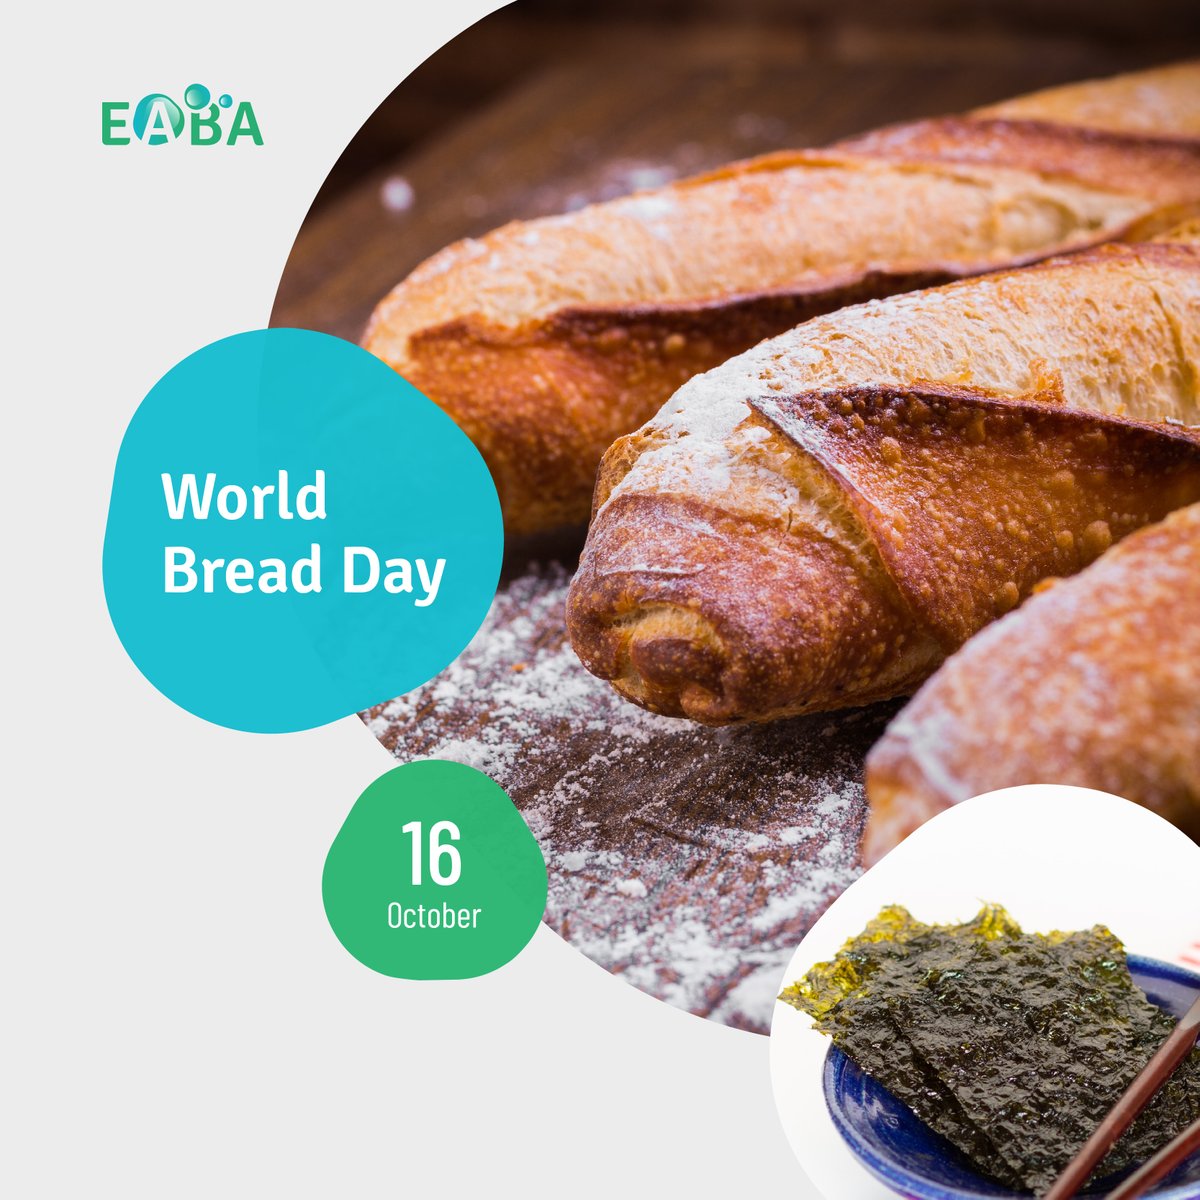 Today is World Bread Day! 🌍🥖 ➡️ Bread + algae = nutritional advantages, salt alternative, original texture, something to pique the curiosity of your guests 😉 #algae #microalgae #seaweed #biomass #marinebiology #research, #innovation #worldbreadday #bread #cooking